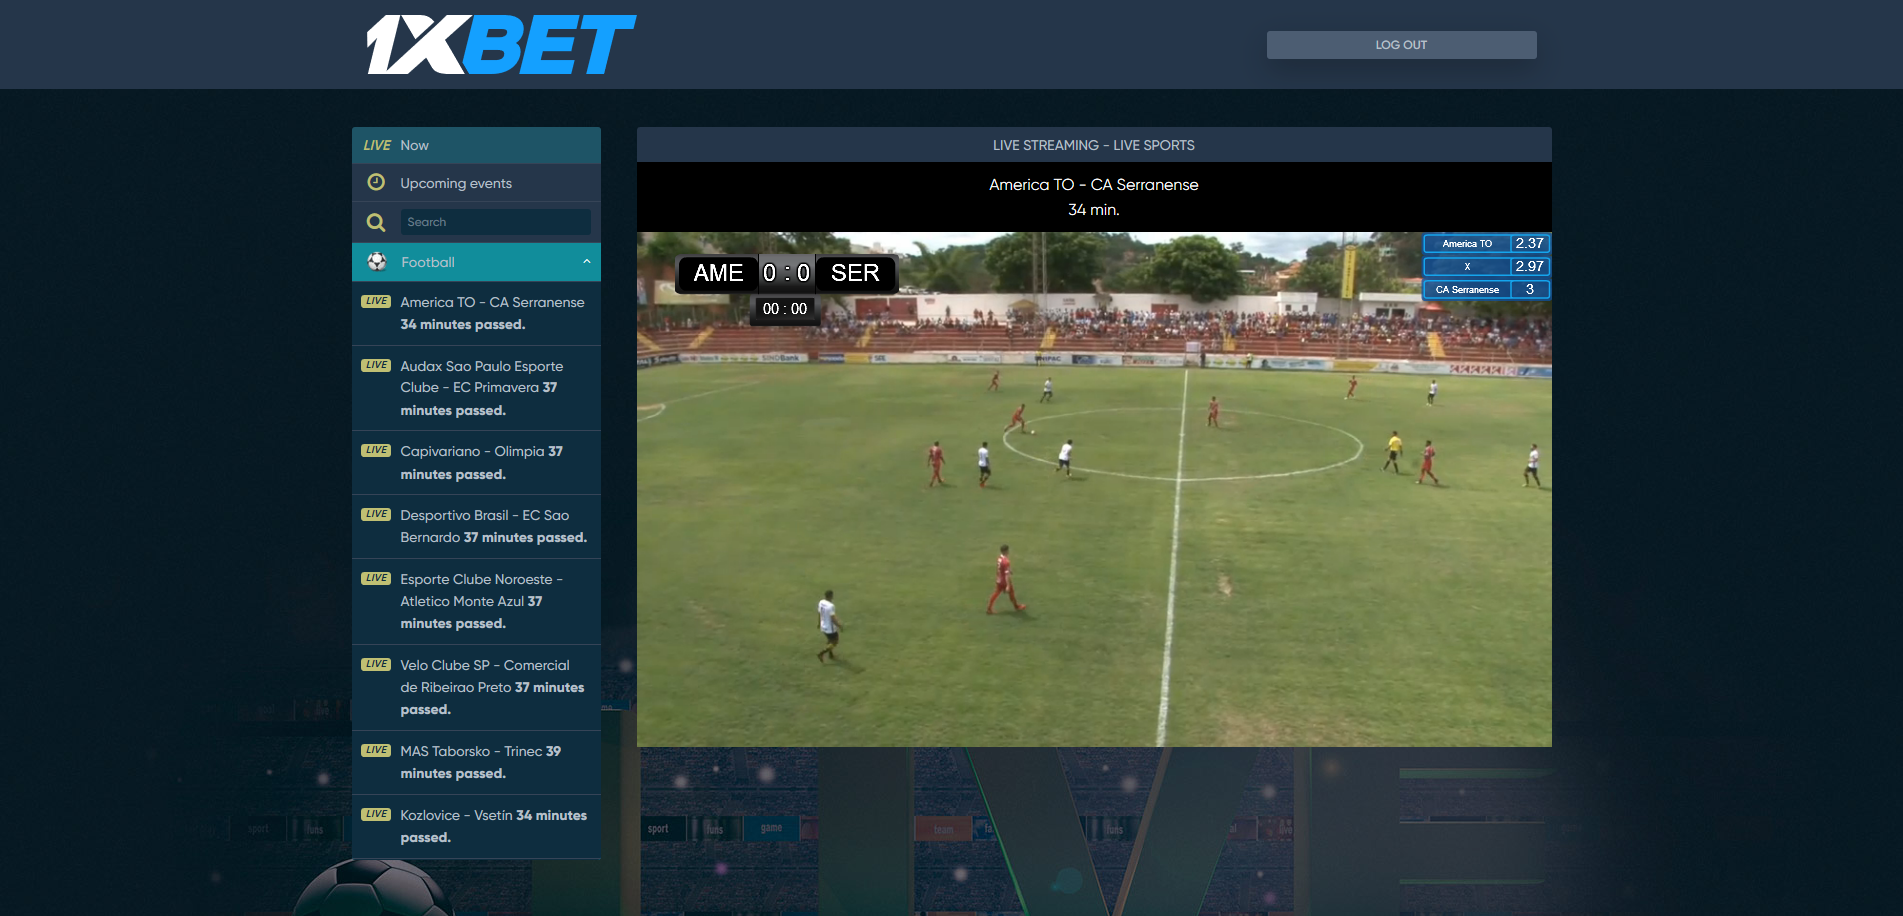 1xbet mobile streaming